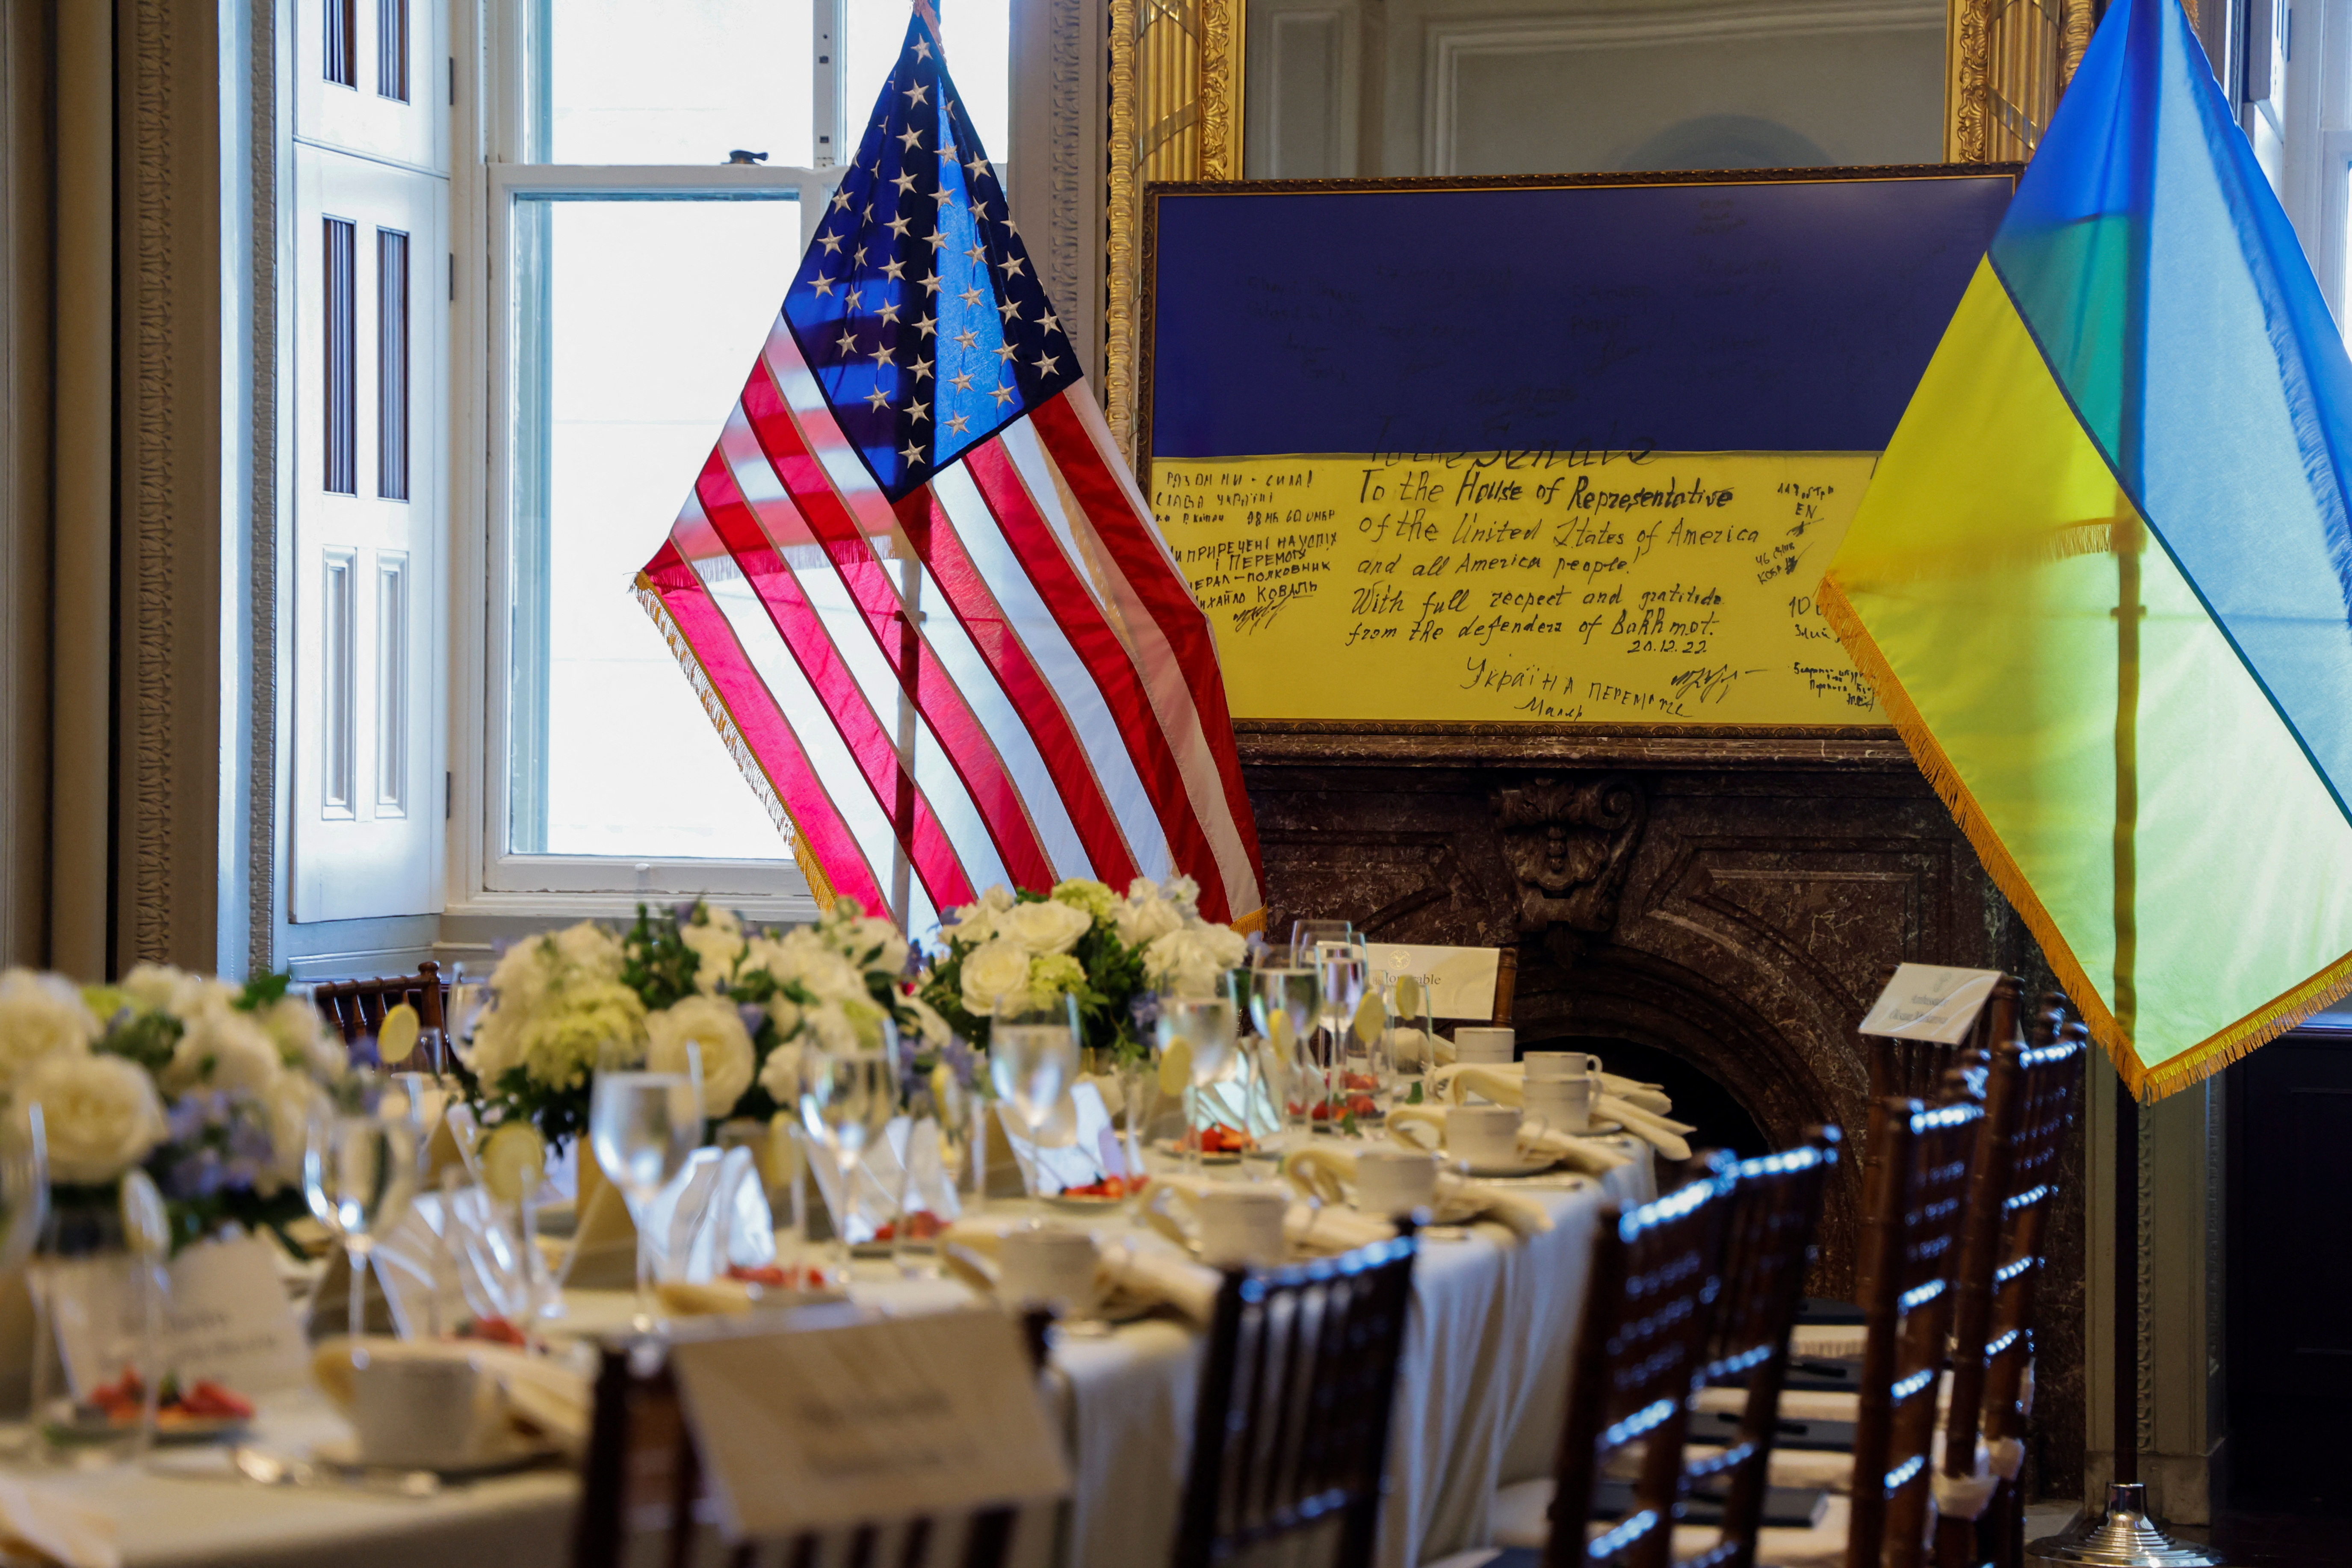 A framed flag signed by front-line Ukrainian fighters in Bakhmut and presented to the U.S. Congress in 2022, sits at one end of the table the U.S. Capitol, in Washington